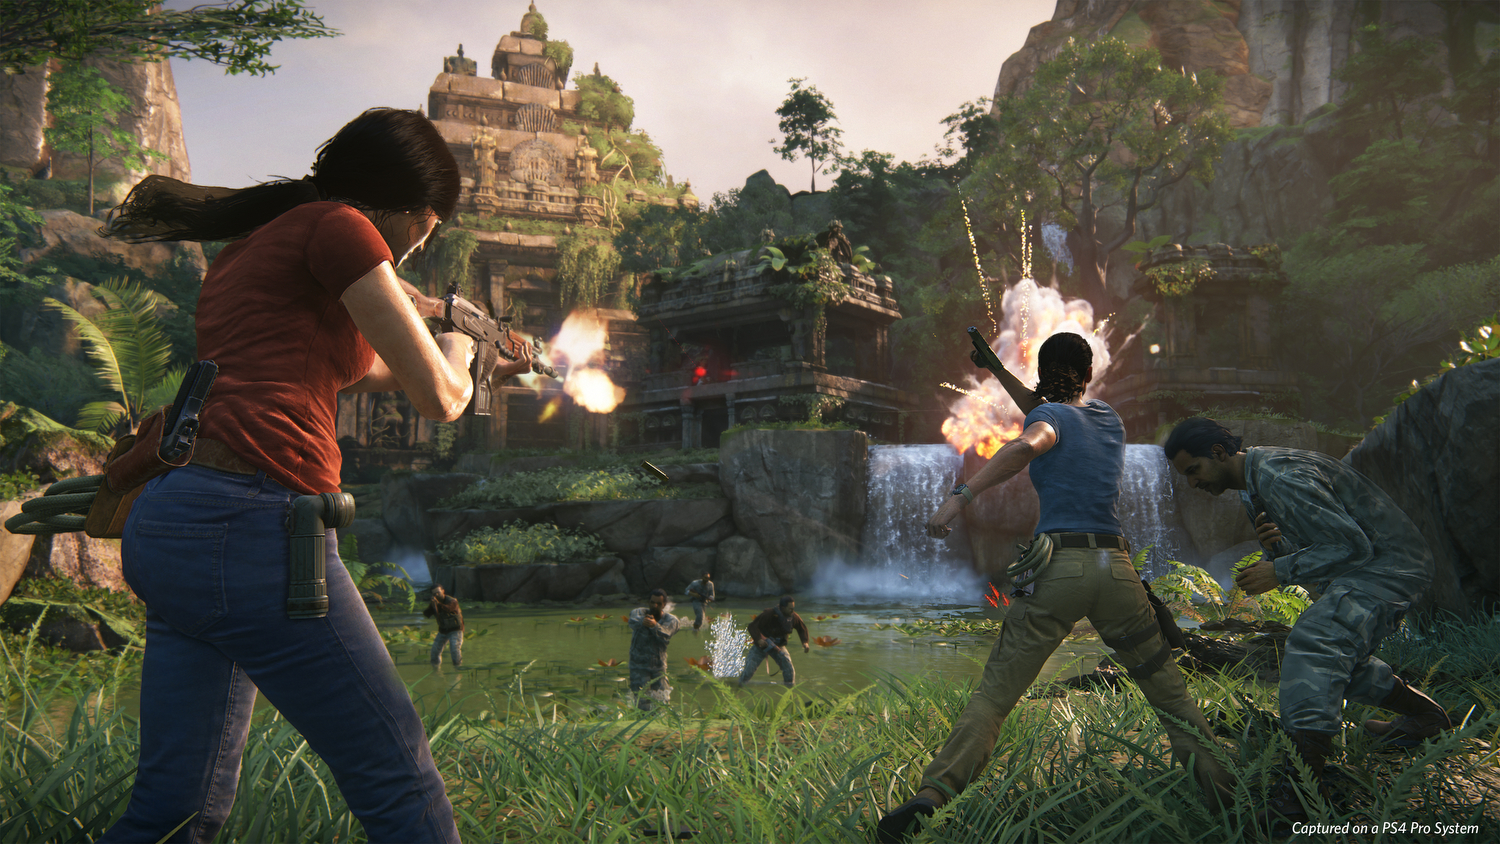 Uncharted 4: A Thief's End' serves up action  and personal issues - Los  Angeles Times